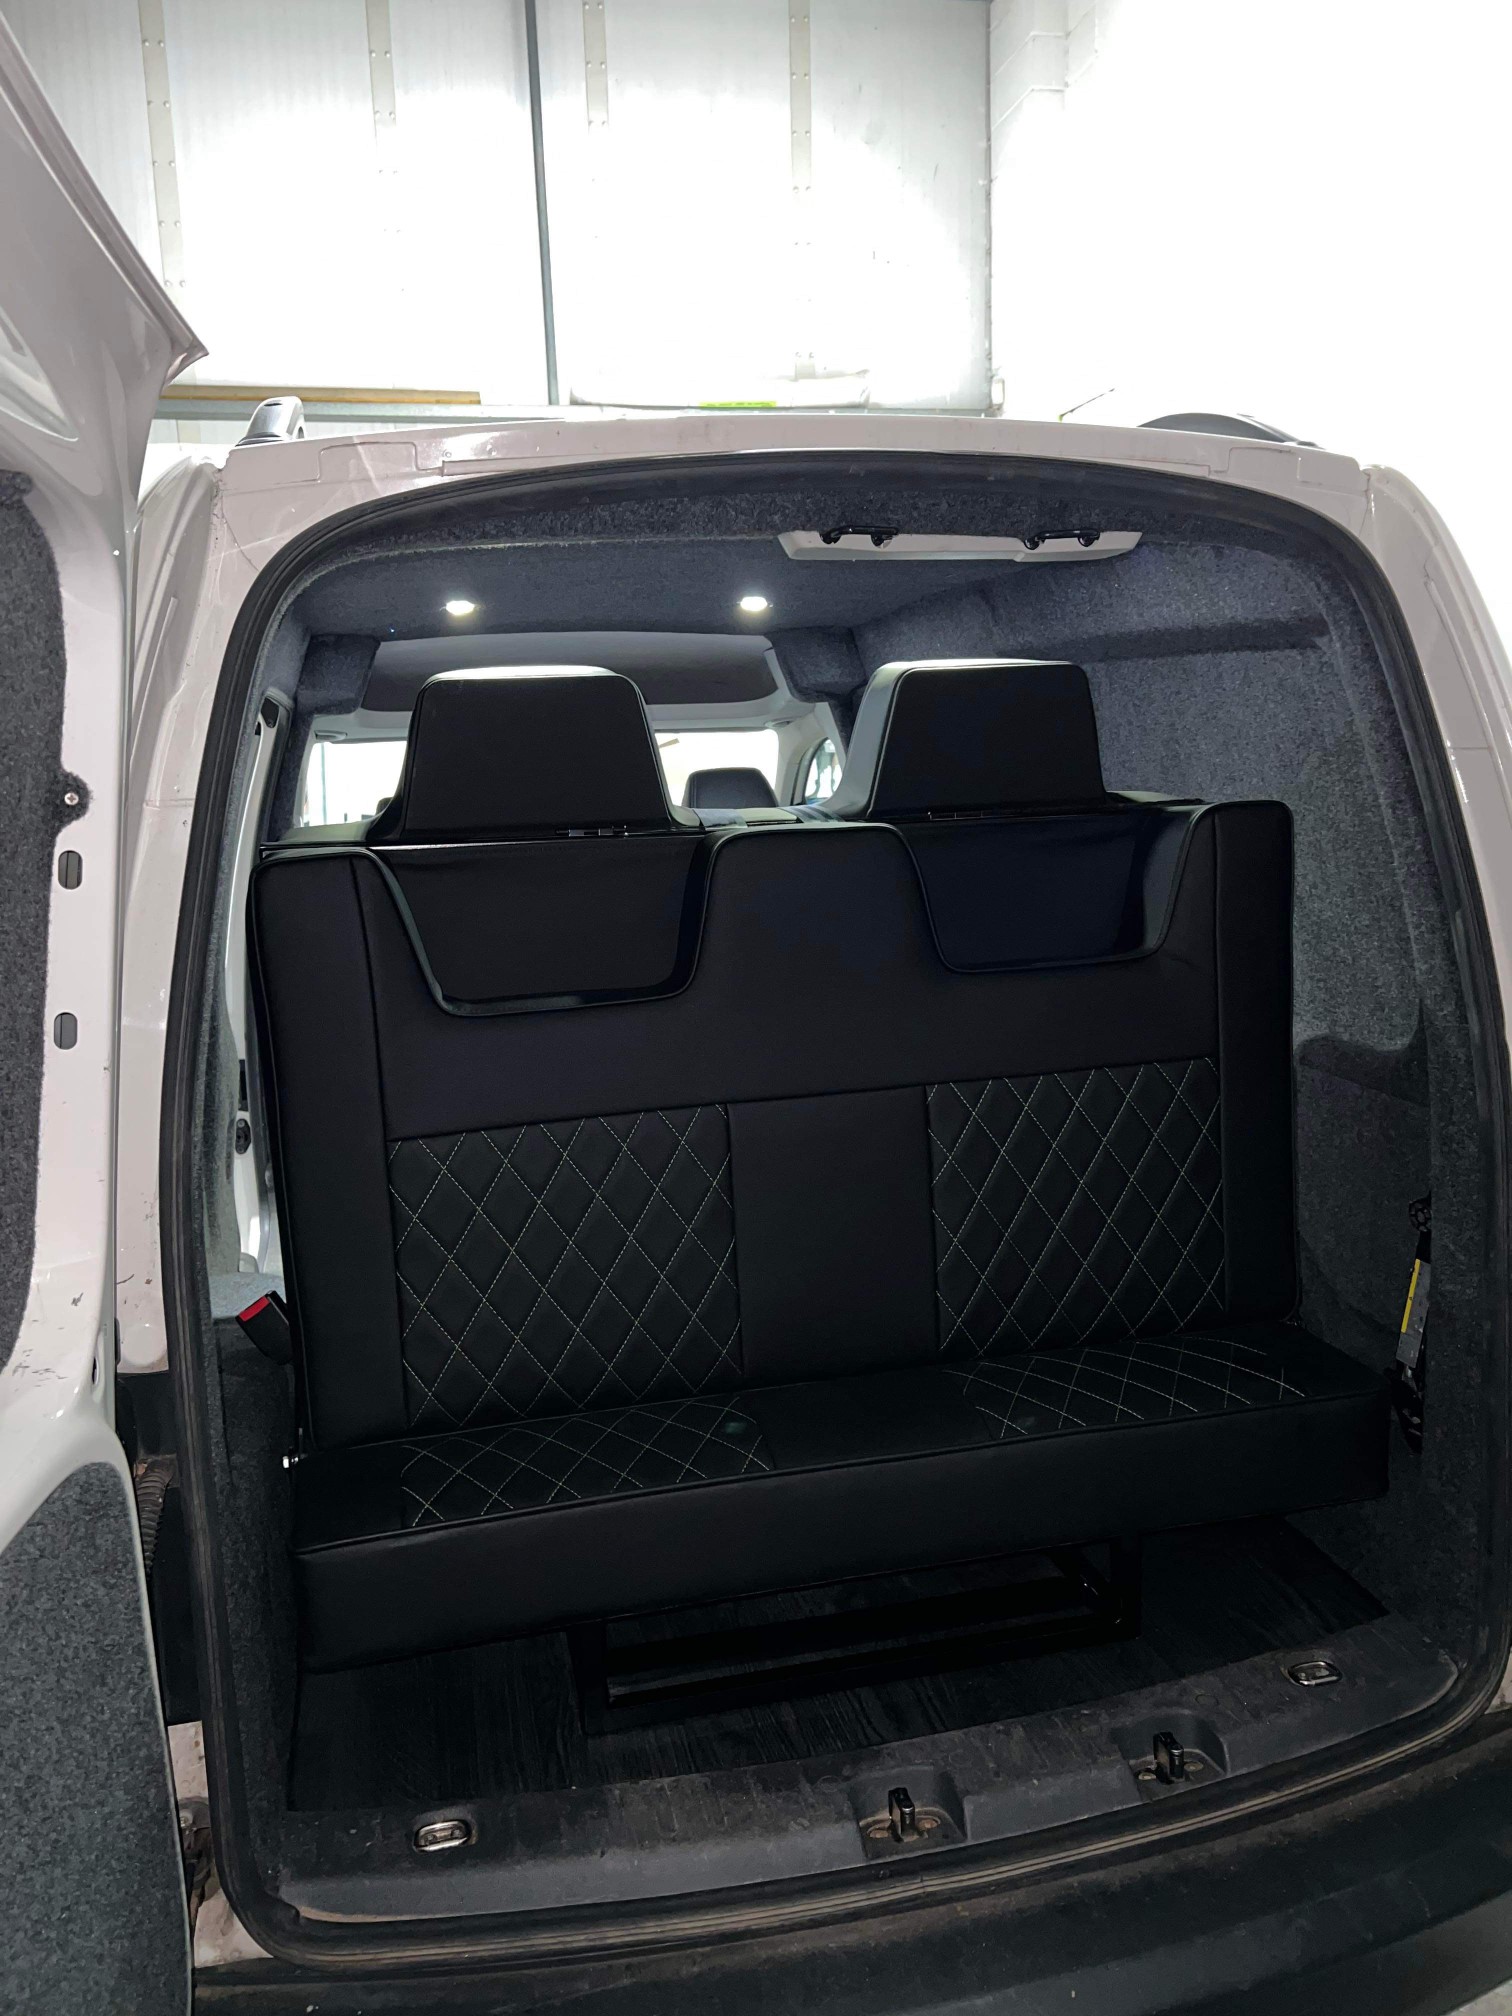 VW Caddy, Windows, insulation, carpet, lights, floor and Altro flooring, fit ( (9)